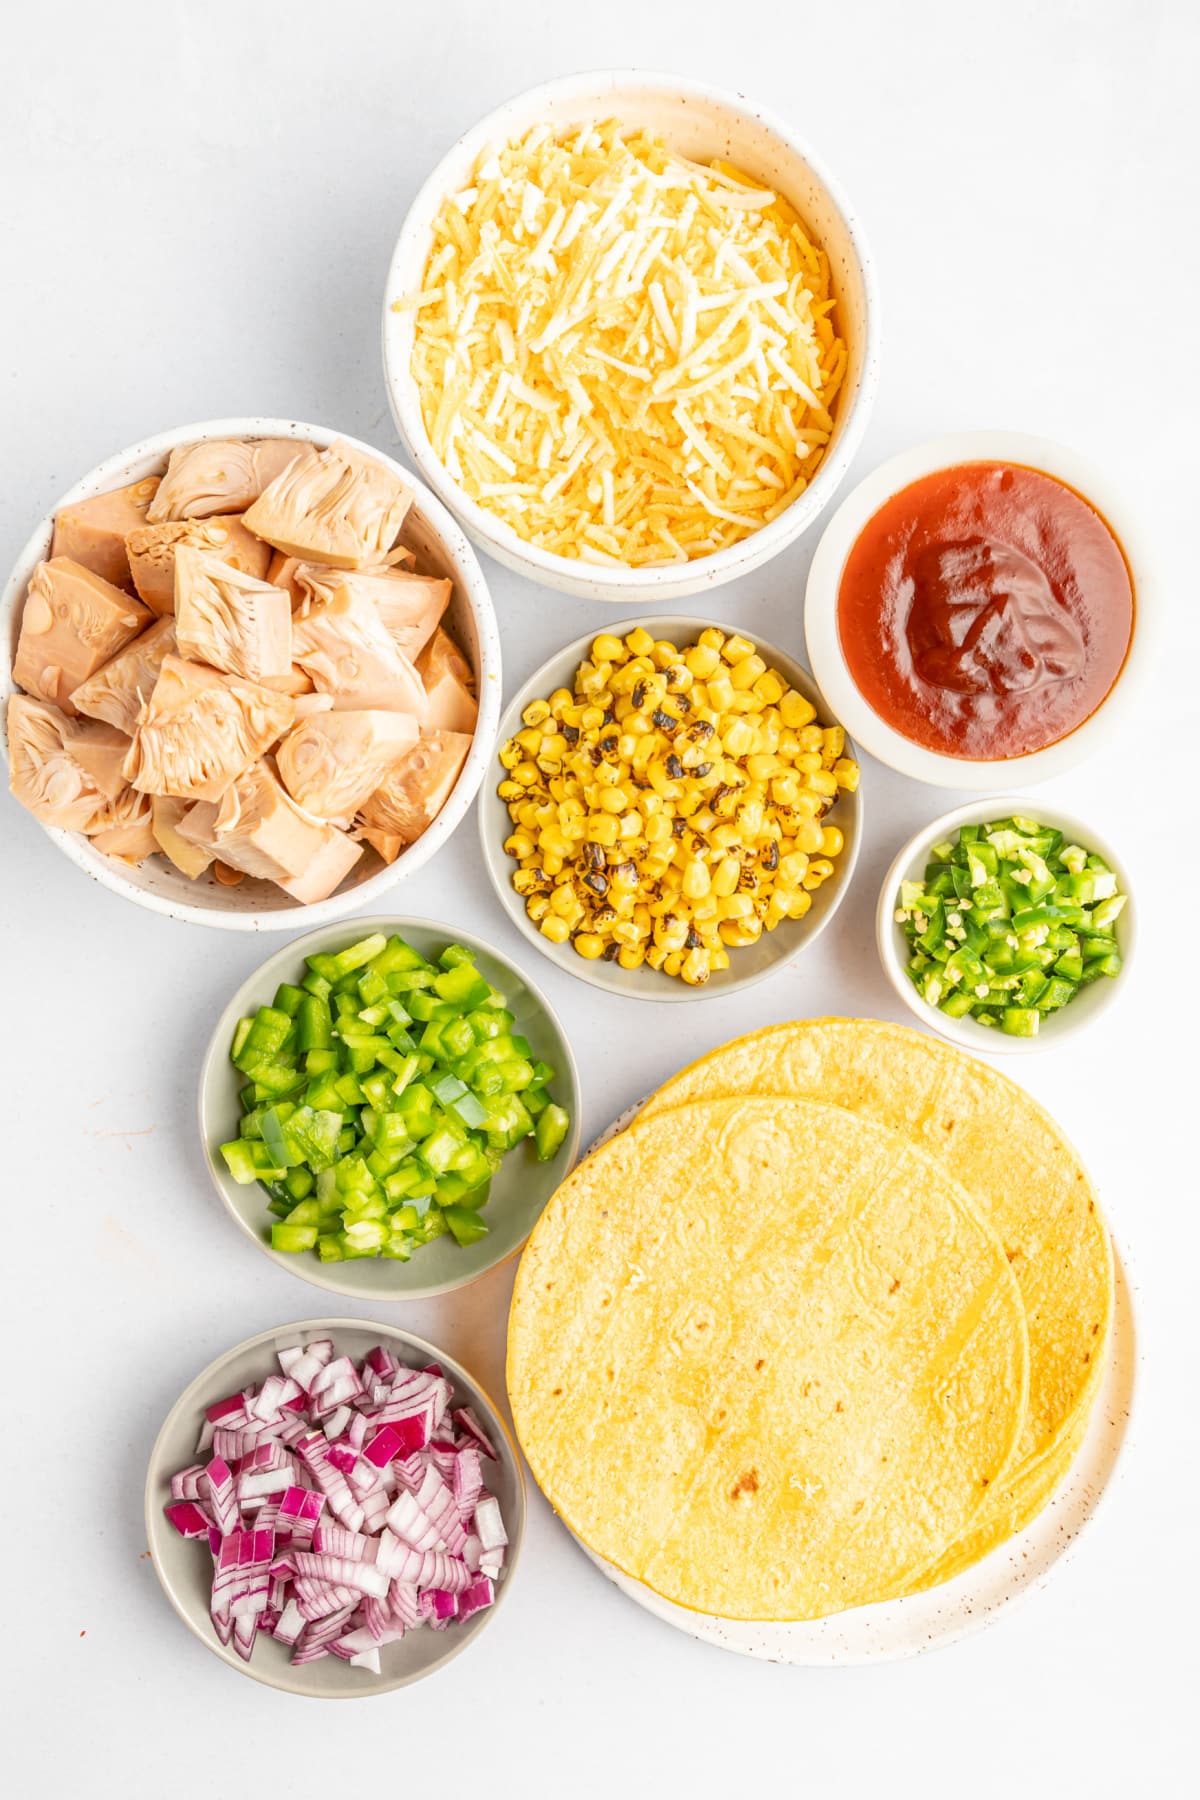 Separate bowls of ingredients for BBQ taquitos: jackfruit, cheese, fire roasted corn, died red onion, diced jalapeno peppers, and BBQ sauce.